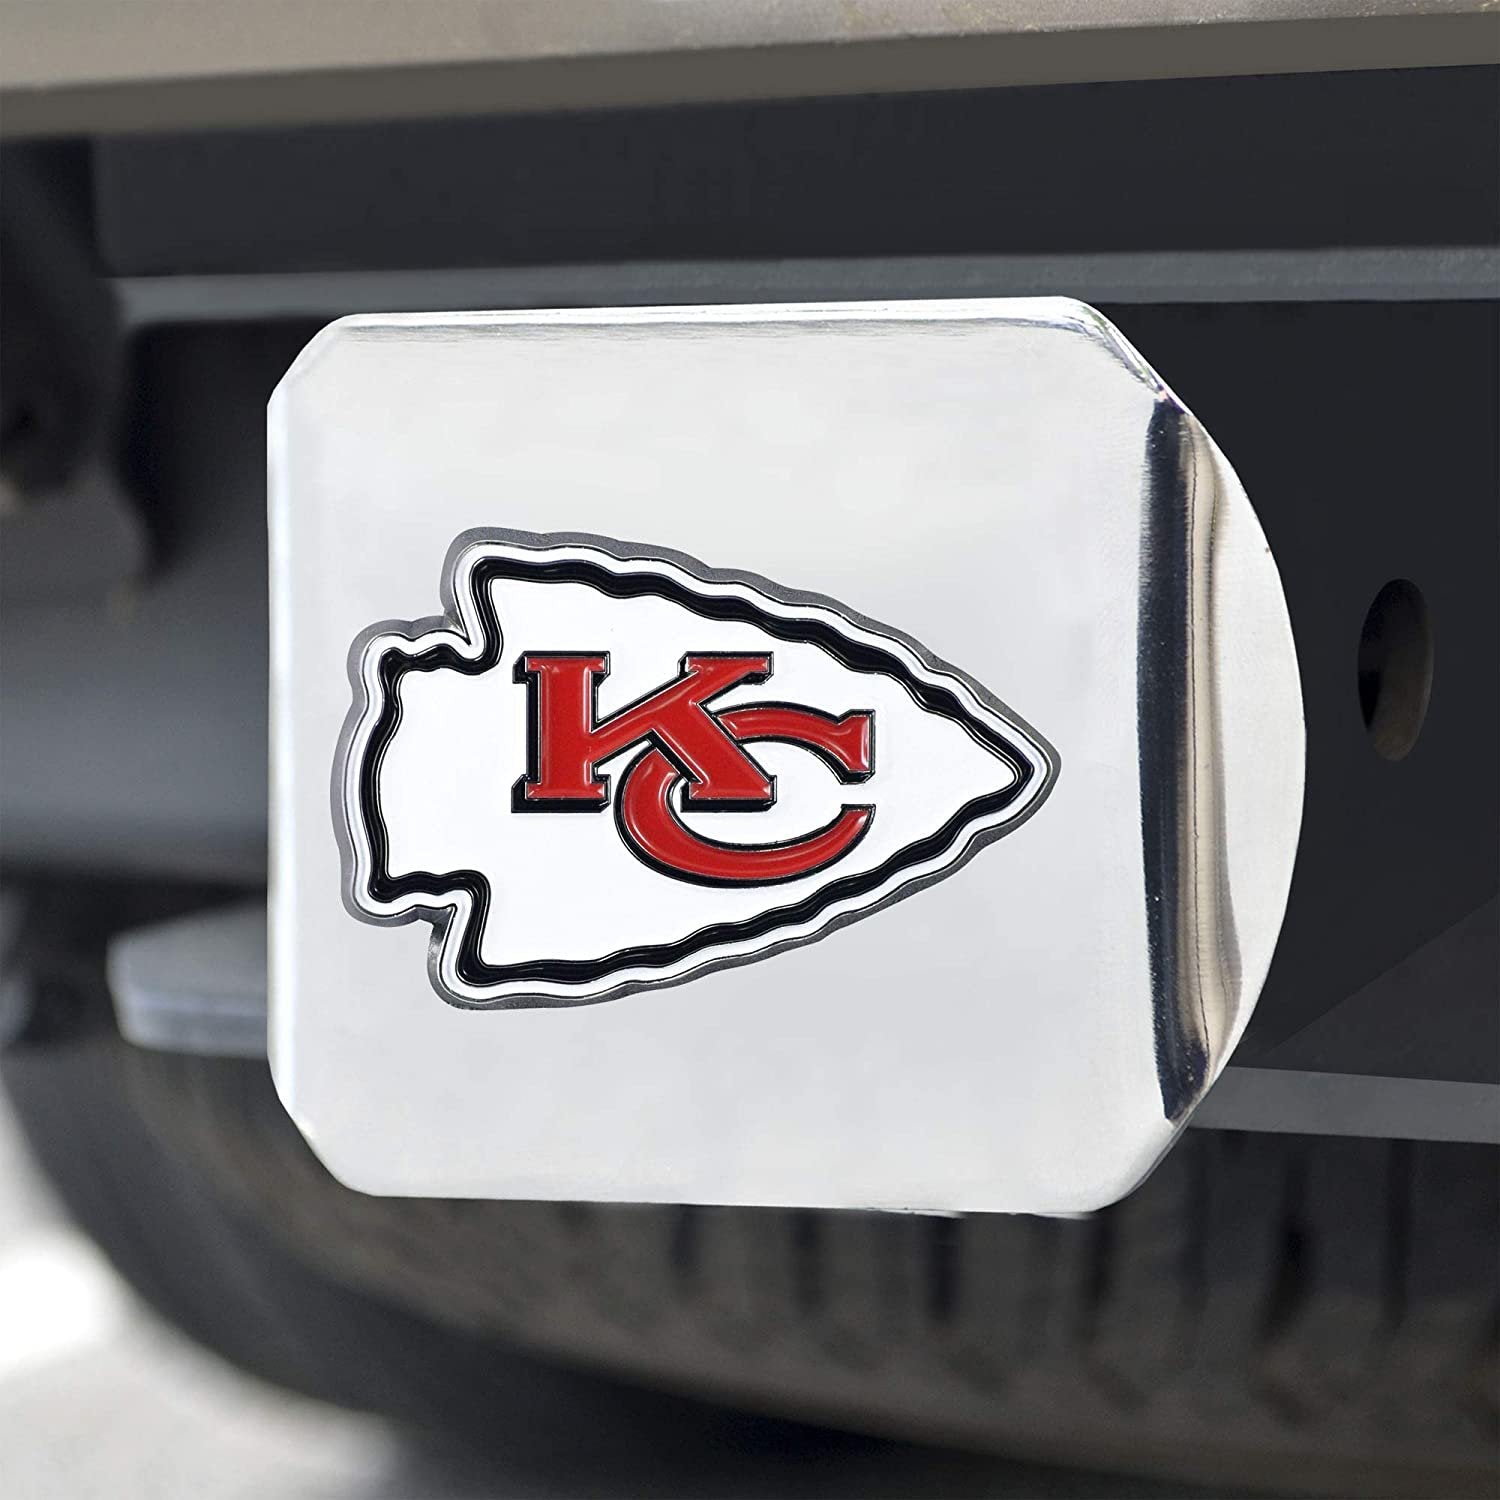 Kansas City Chiefs Hitch Cover Solid Metal with Raised Color Metal Emblem 2" Square Type III